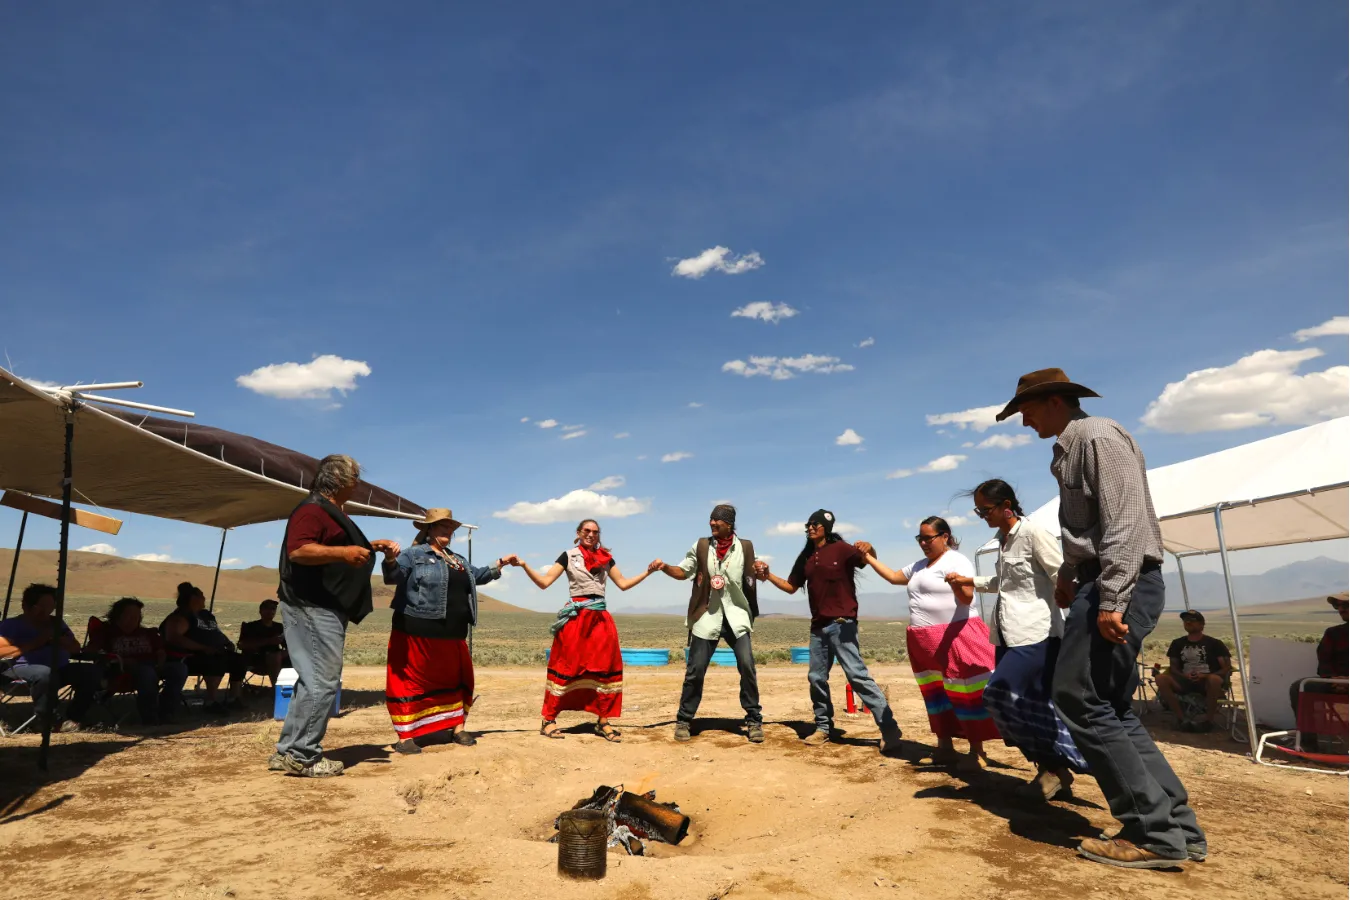 Land Rights and Natural Resources: Legal Issues Faced by Nevada's Native American Communities